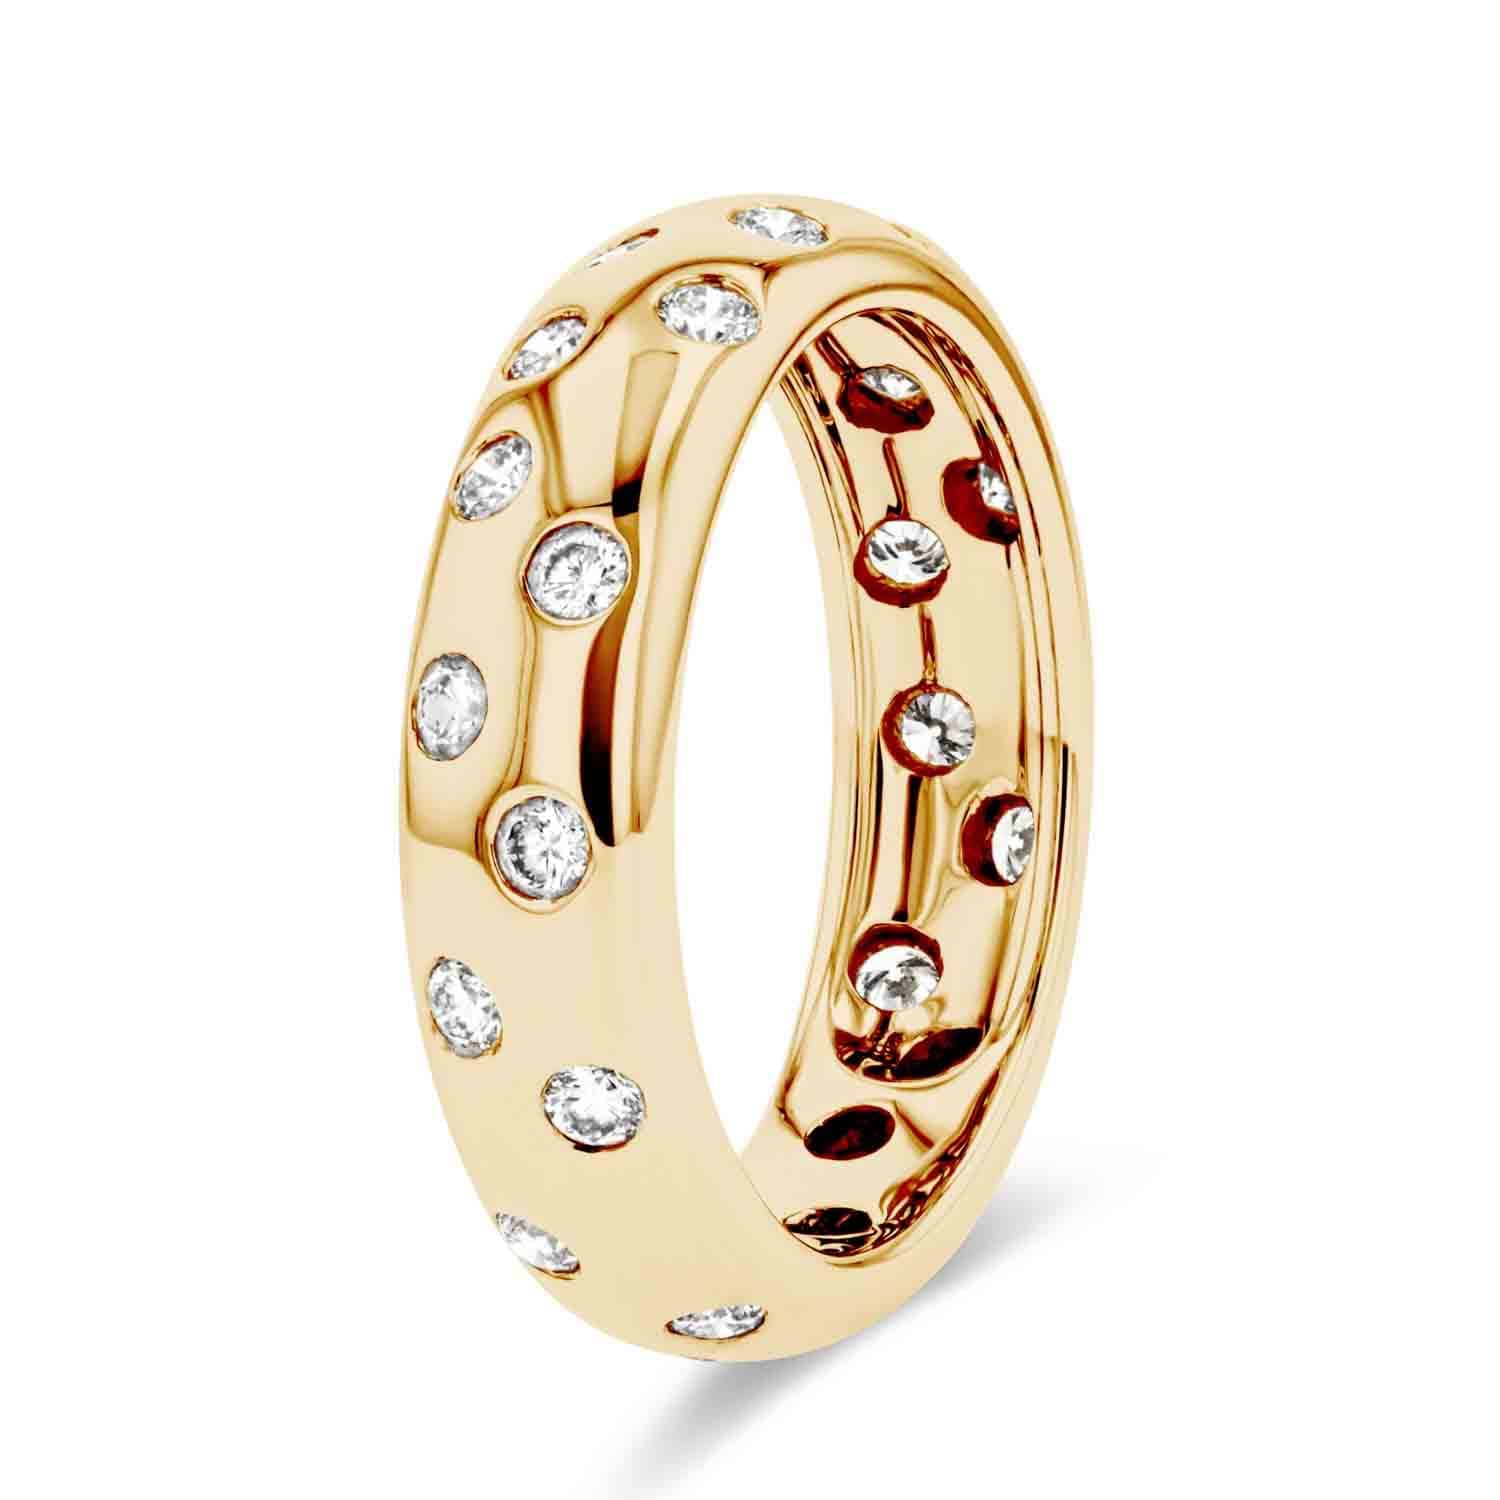 Lavish Diamond Accented Band Shown In 14K Yellow Gold|scattered diamond eternity band fashion ring in 14k yellow gold